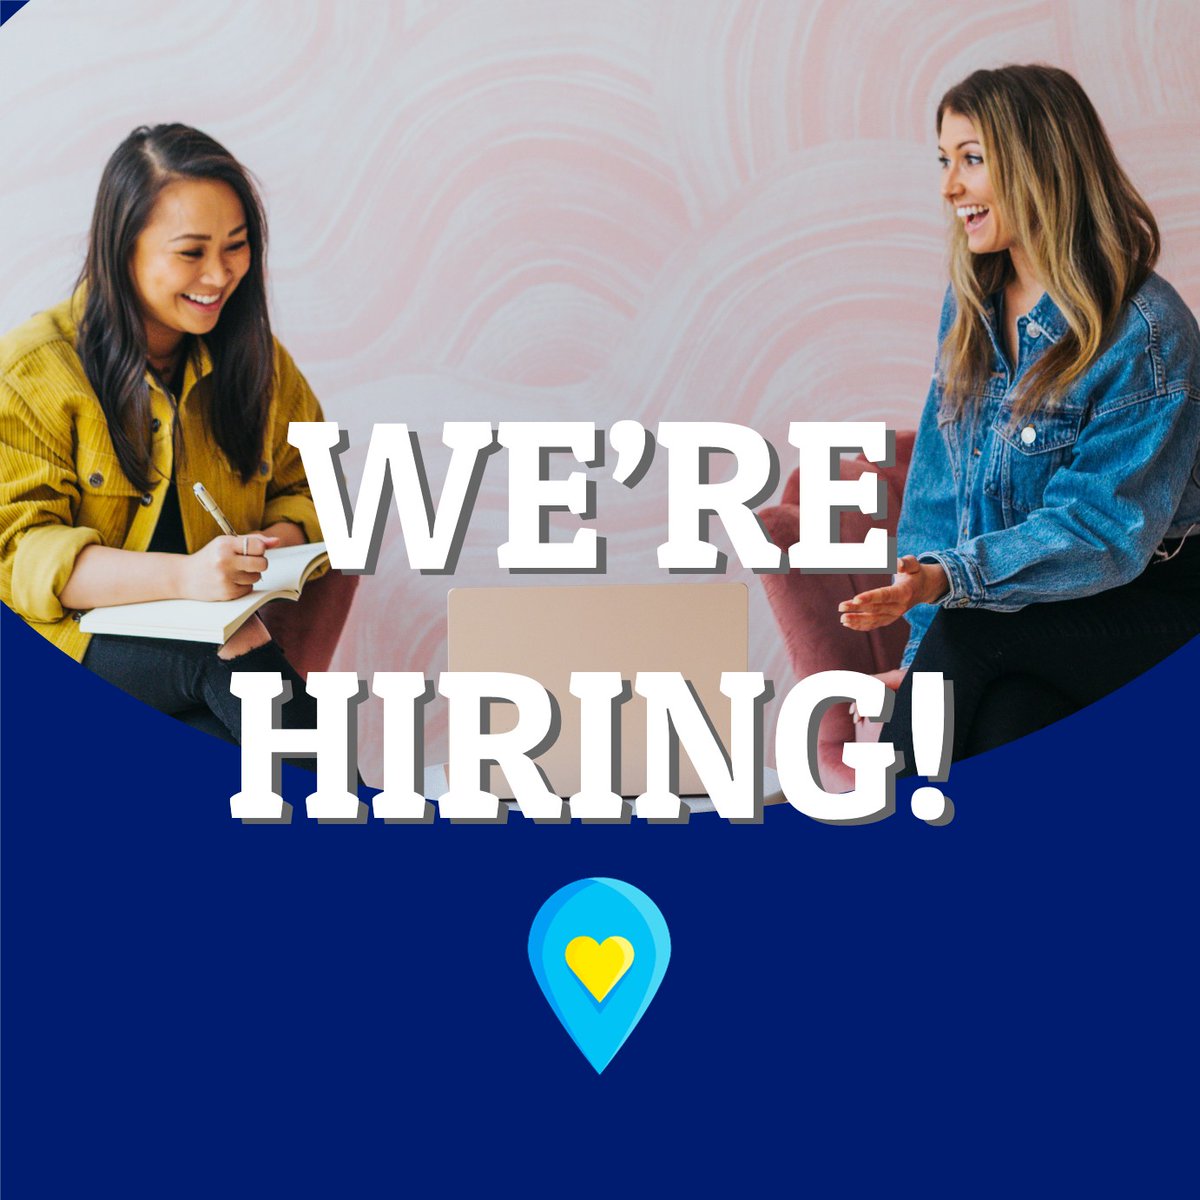 Sidewalk Advocates for Life is on the grow! We're in search of a Major Gift Officer to join our National Team. Do you have the skills and the heart for life to fill this key position? Click to learn more: sidewalkadvocates.org/getinvolved/ca…

#werehiring #joinus #sidewalkadvocacy